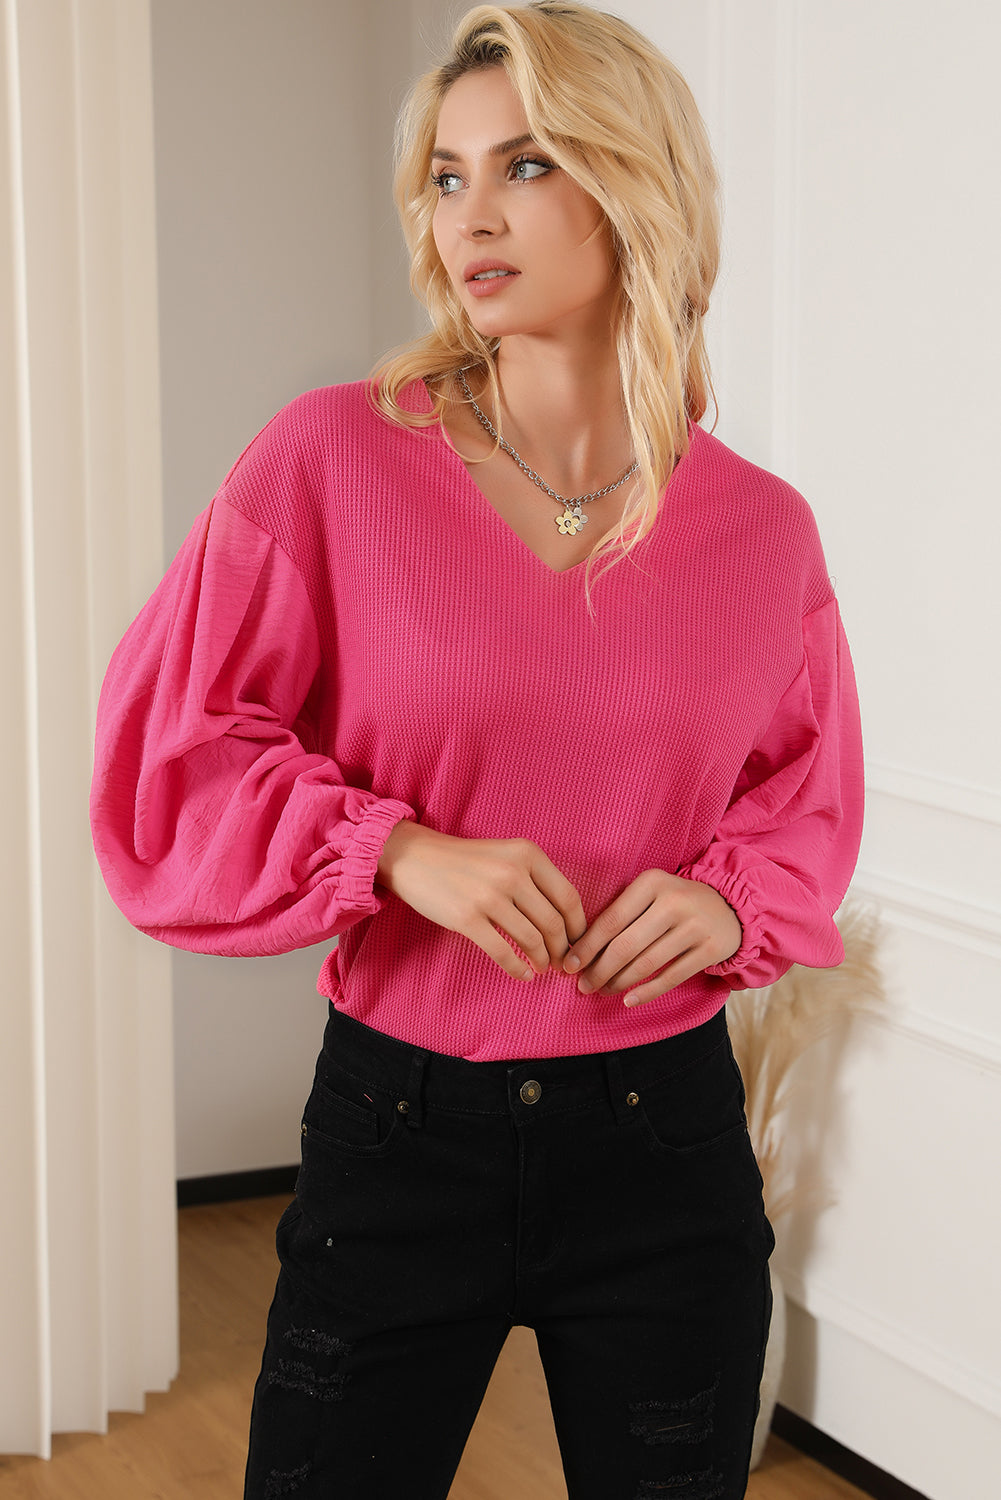 Rose 95%Polyester+5%Elastane Waffle Knit Balloon Sleeve Splicing V Neck Top - 2 colors - women's shirt at TFC&H Co.